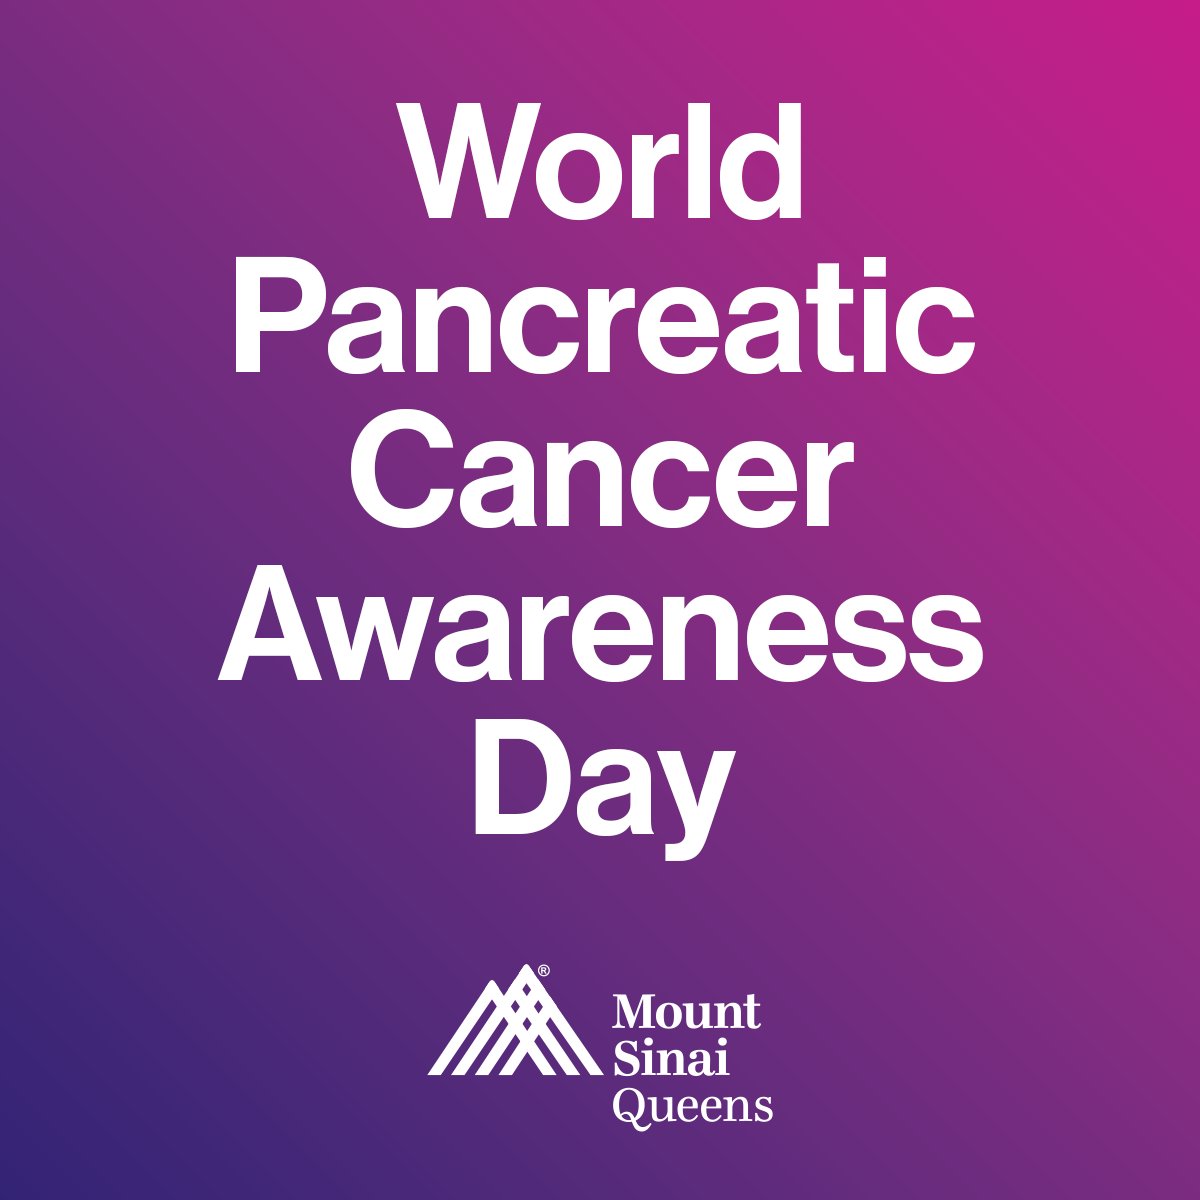 Today is World Pancreatic Cancer Awareness Day. It is critical for us to raise awareness of pancreatic cancer. Learn more about the causes, symptoms, treatments, and preventions. bit.ly/3DWlyGT